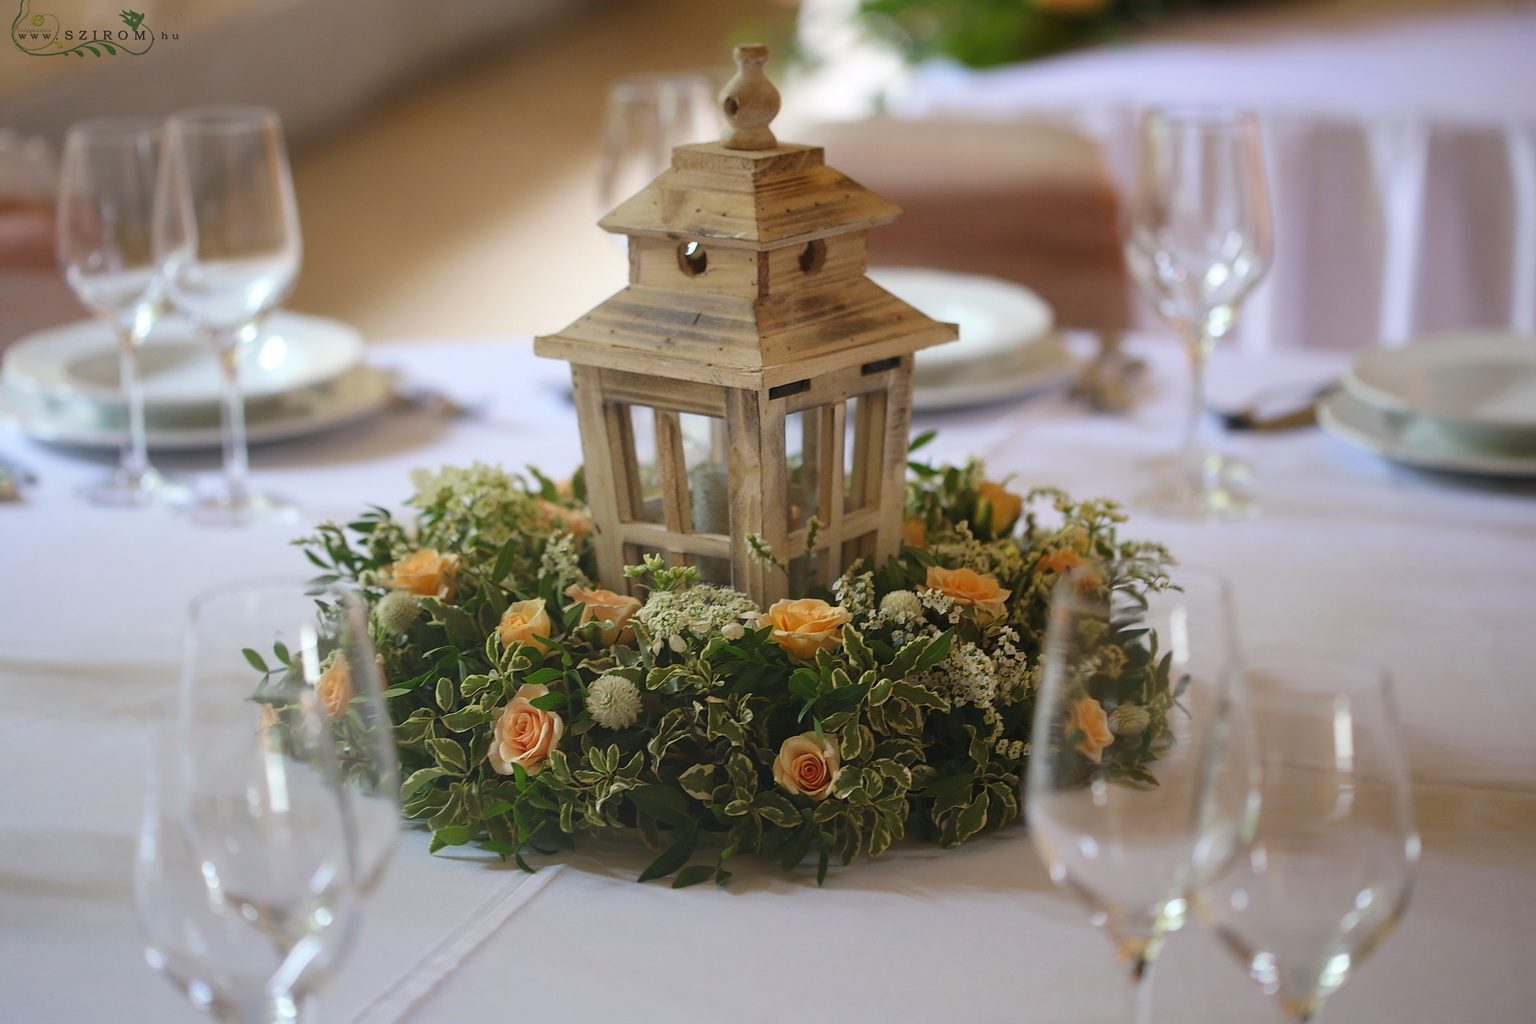 flower delivery Budapest - Centerpiece with lantern (small flowers, spray roses, peach) Vajdahunyad castle